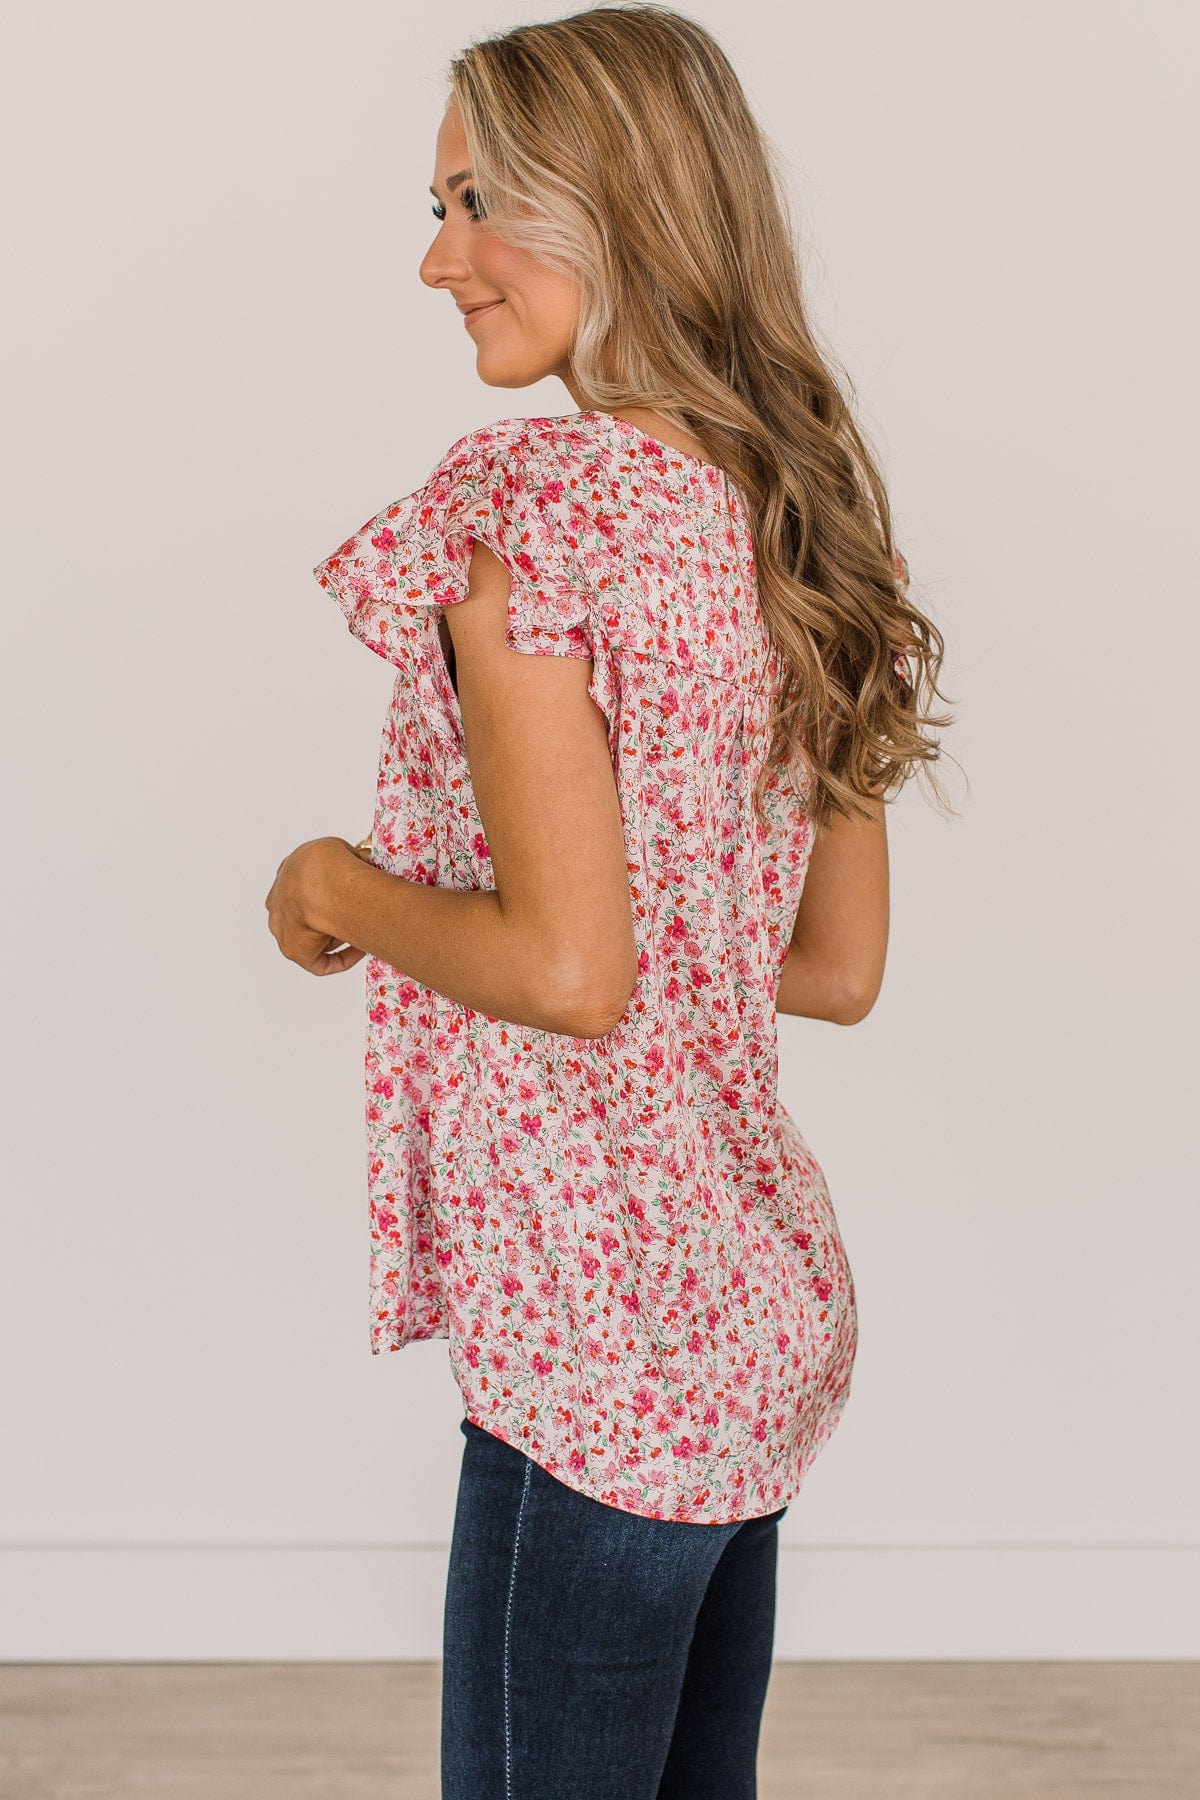 It's A New Day Floral Blouse- Ivory & Pink